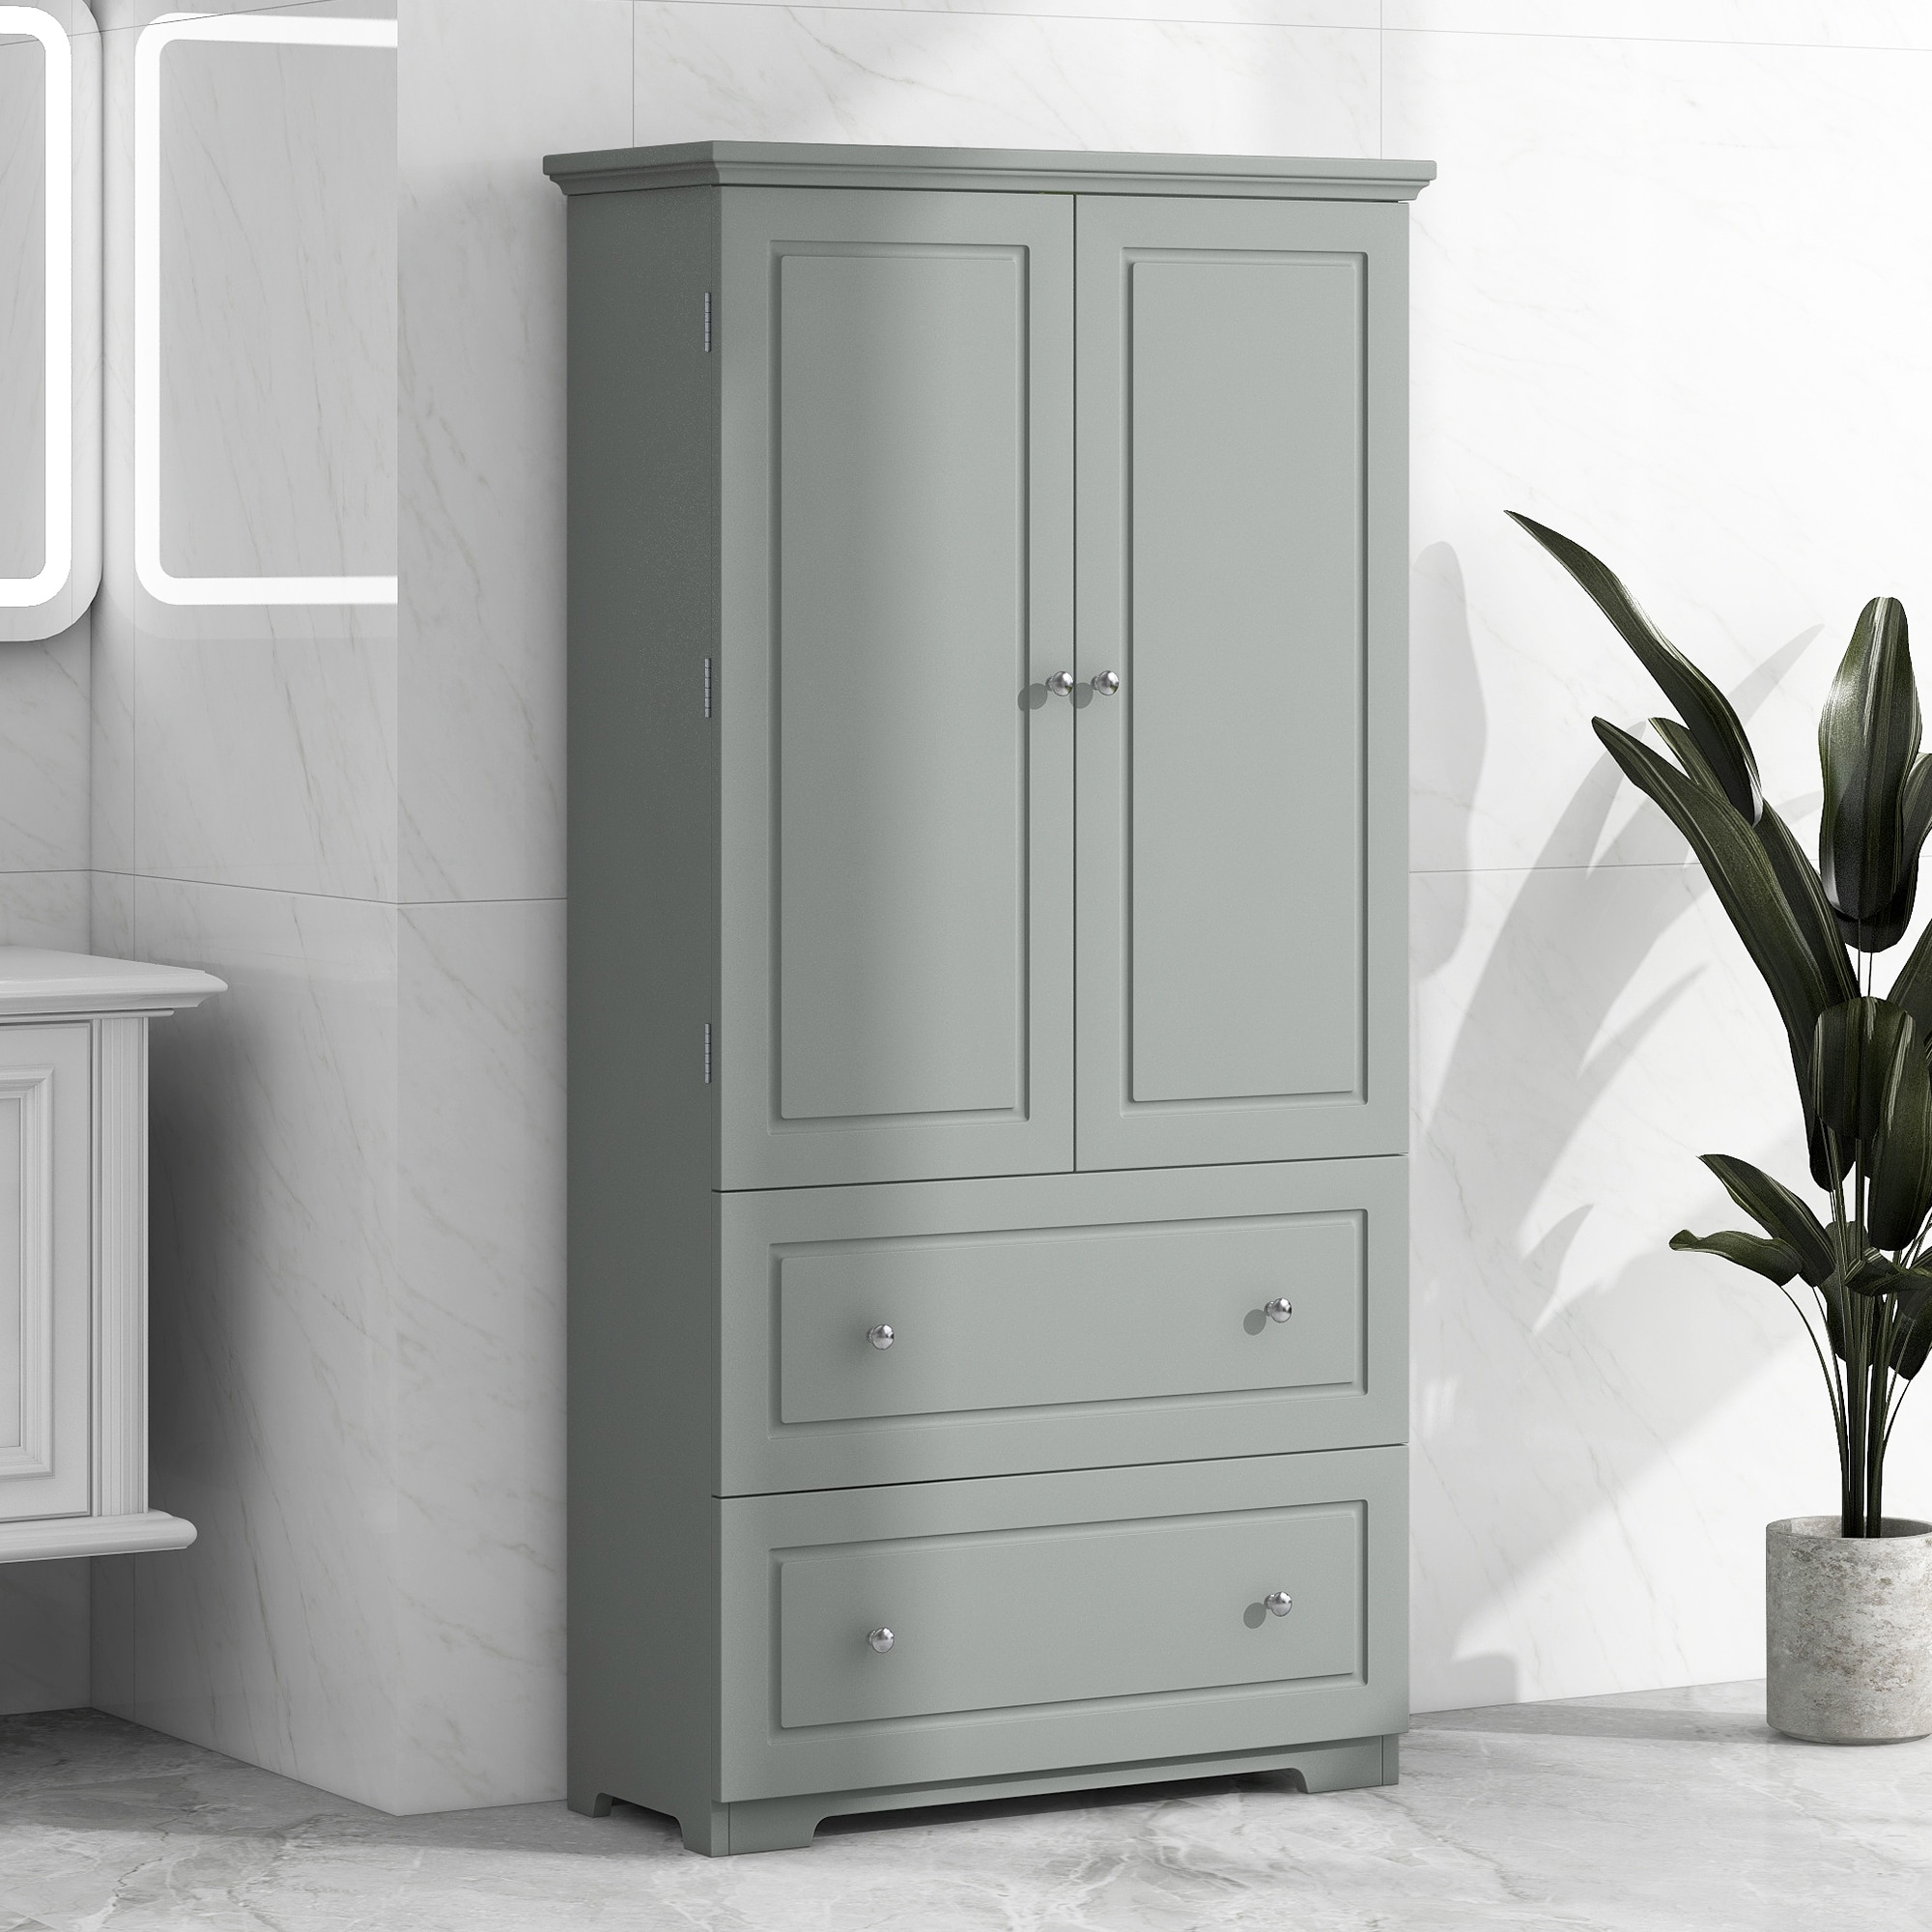 https://ak1.ostkcdn.com/images/products/is/images/direct/919b4fddad21109da095facaf9f6aed92b149935/Wide-Bathroom-Storage-Cabinet%2C-Freestanding-Storage-Cabinet-with-Two-Drawers-and-Adjustable-Shelf%2C-MDF-Board-with-Painted-Finish.jpg